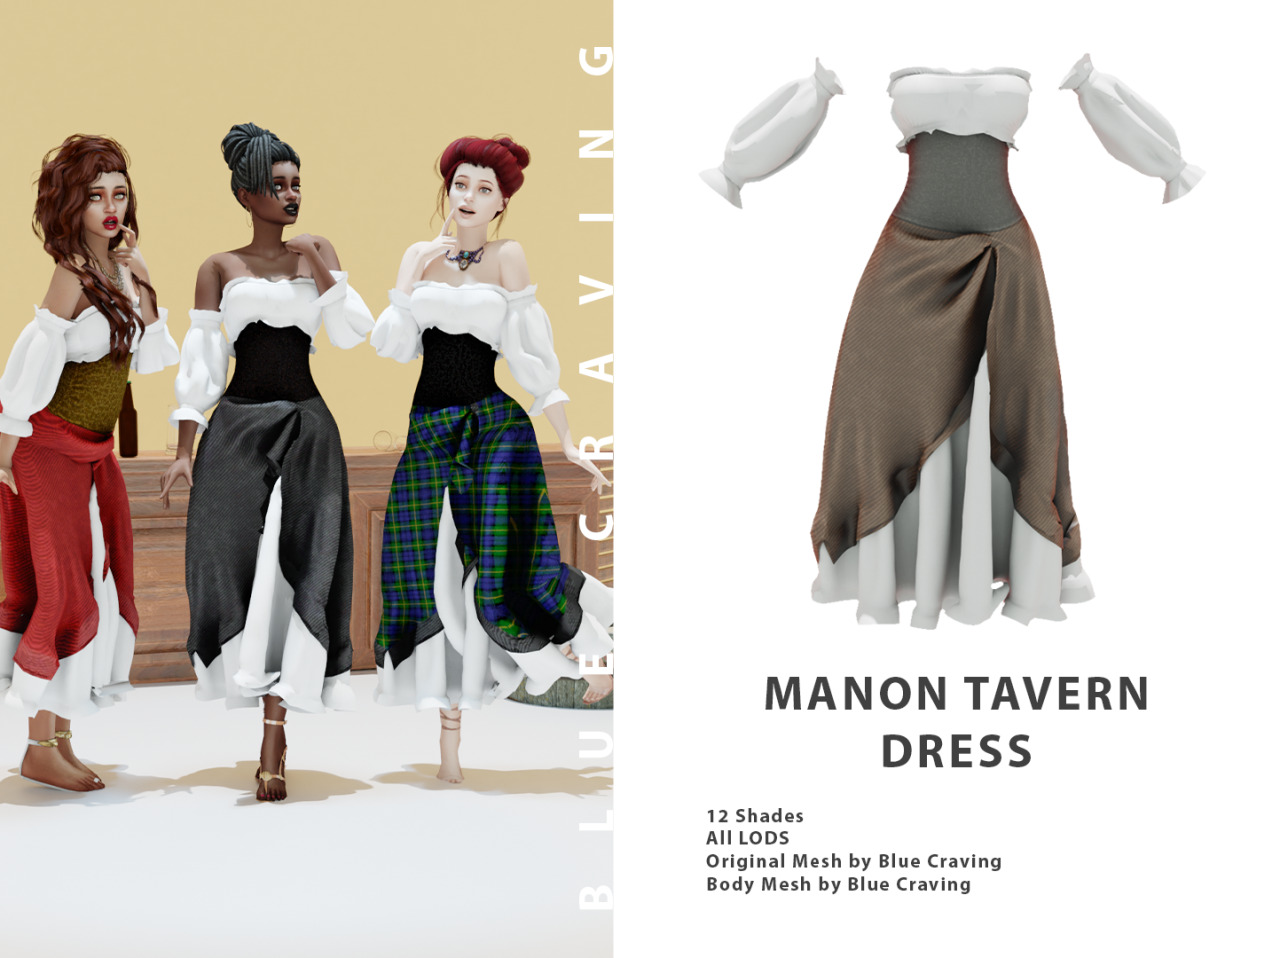 Blue Craving Sims 4 Cc Manon Tavern Dress ♥ Download The